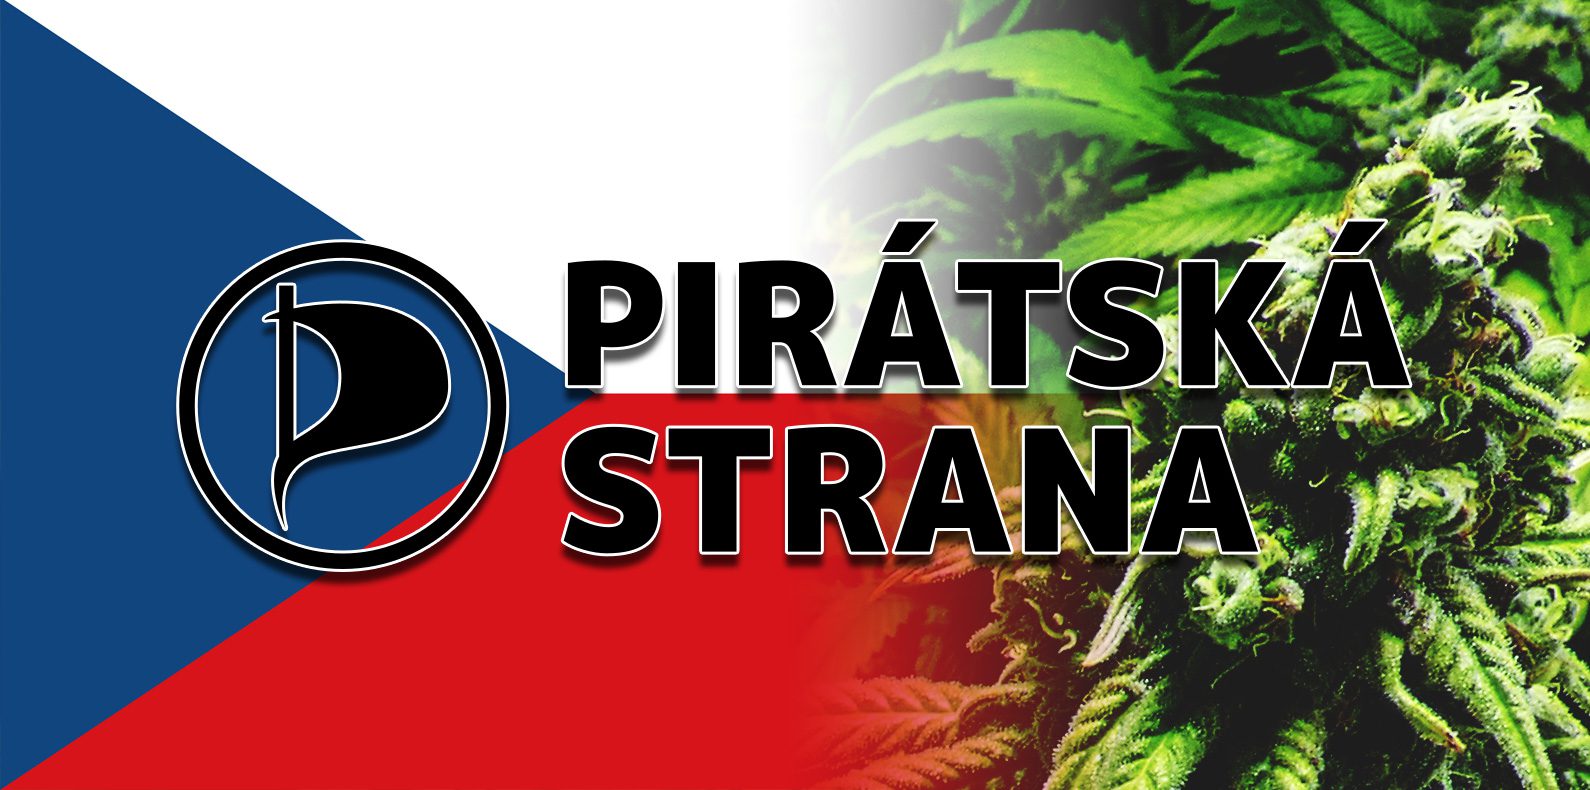 Third strongest political party in Czech Republic introduces cannabis legalization bill